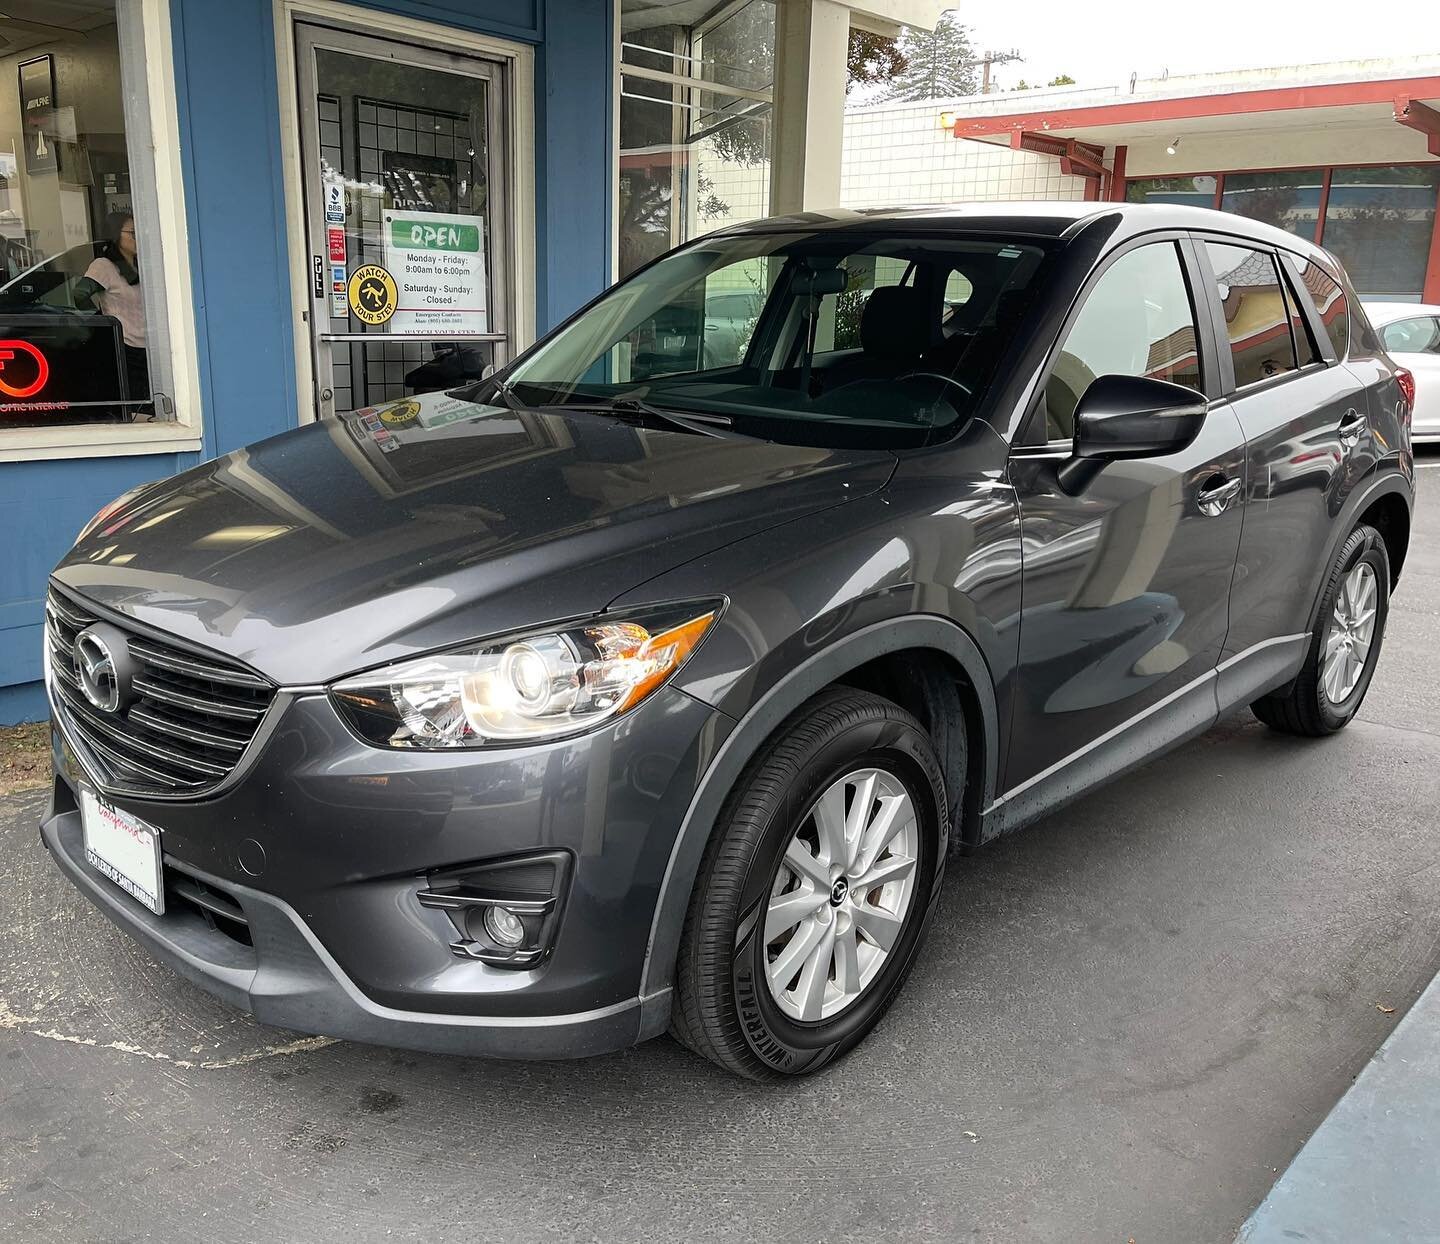 This 2016 Mazda Cx-5&rsquo;s factory radio failed and required replacement. This Jenson CarPlay/Android Auto unit was a perfect fit as we were able to retain the factory camera, steering wheel controls and also create a custom dash kit.
.
.
.
#mazda#